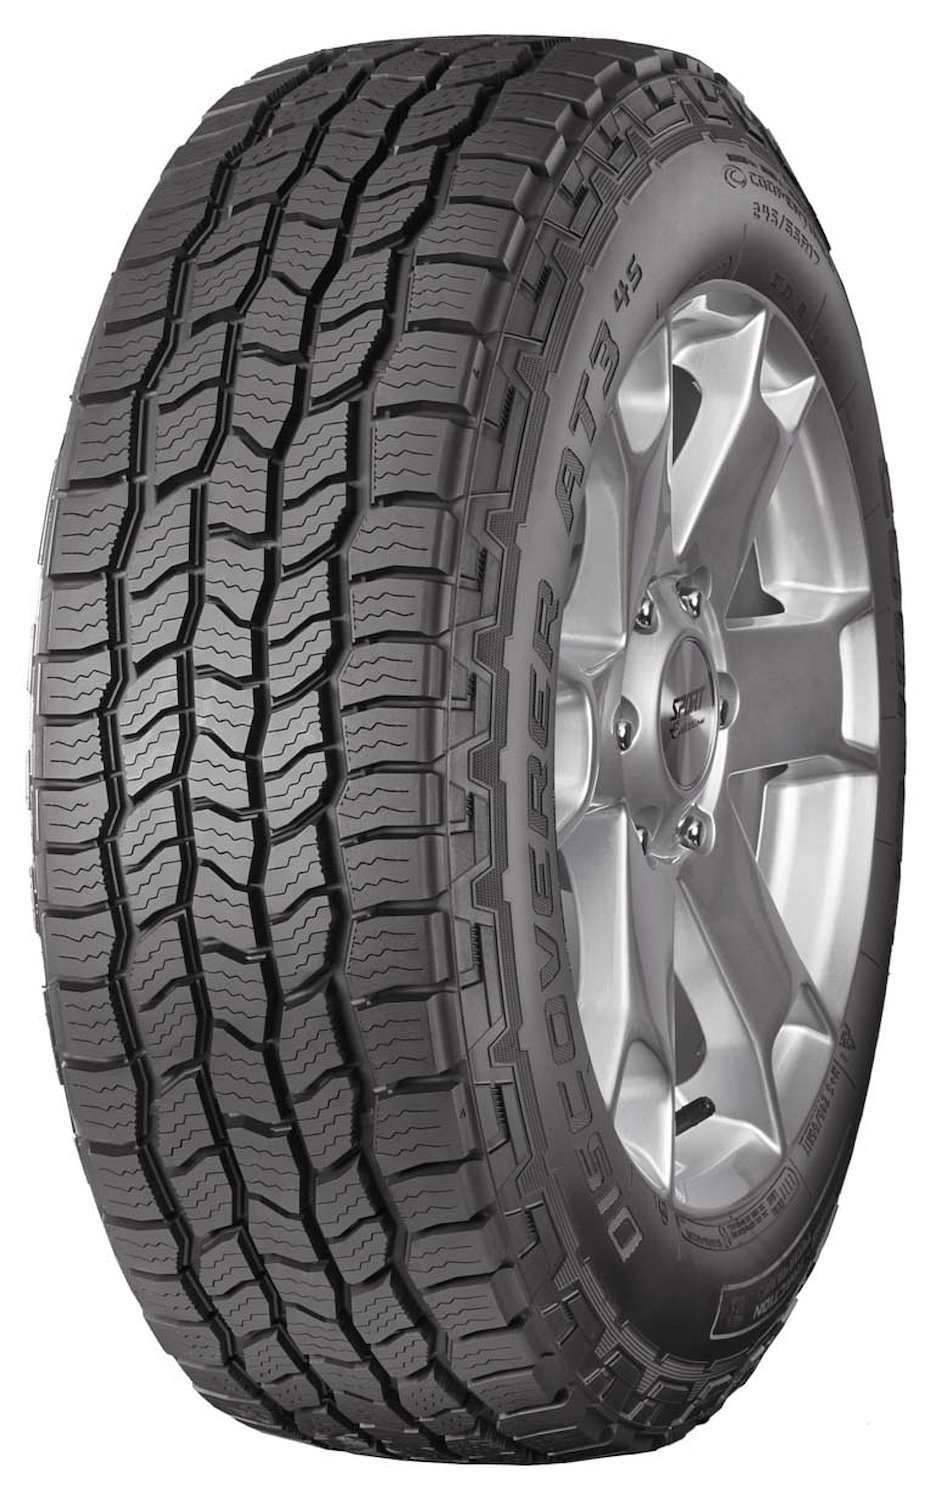 Discoverer AT3 4S All-Terrain Tire, 255/65R17